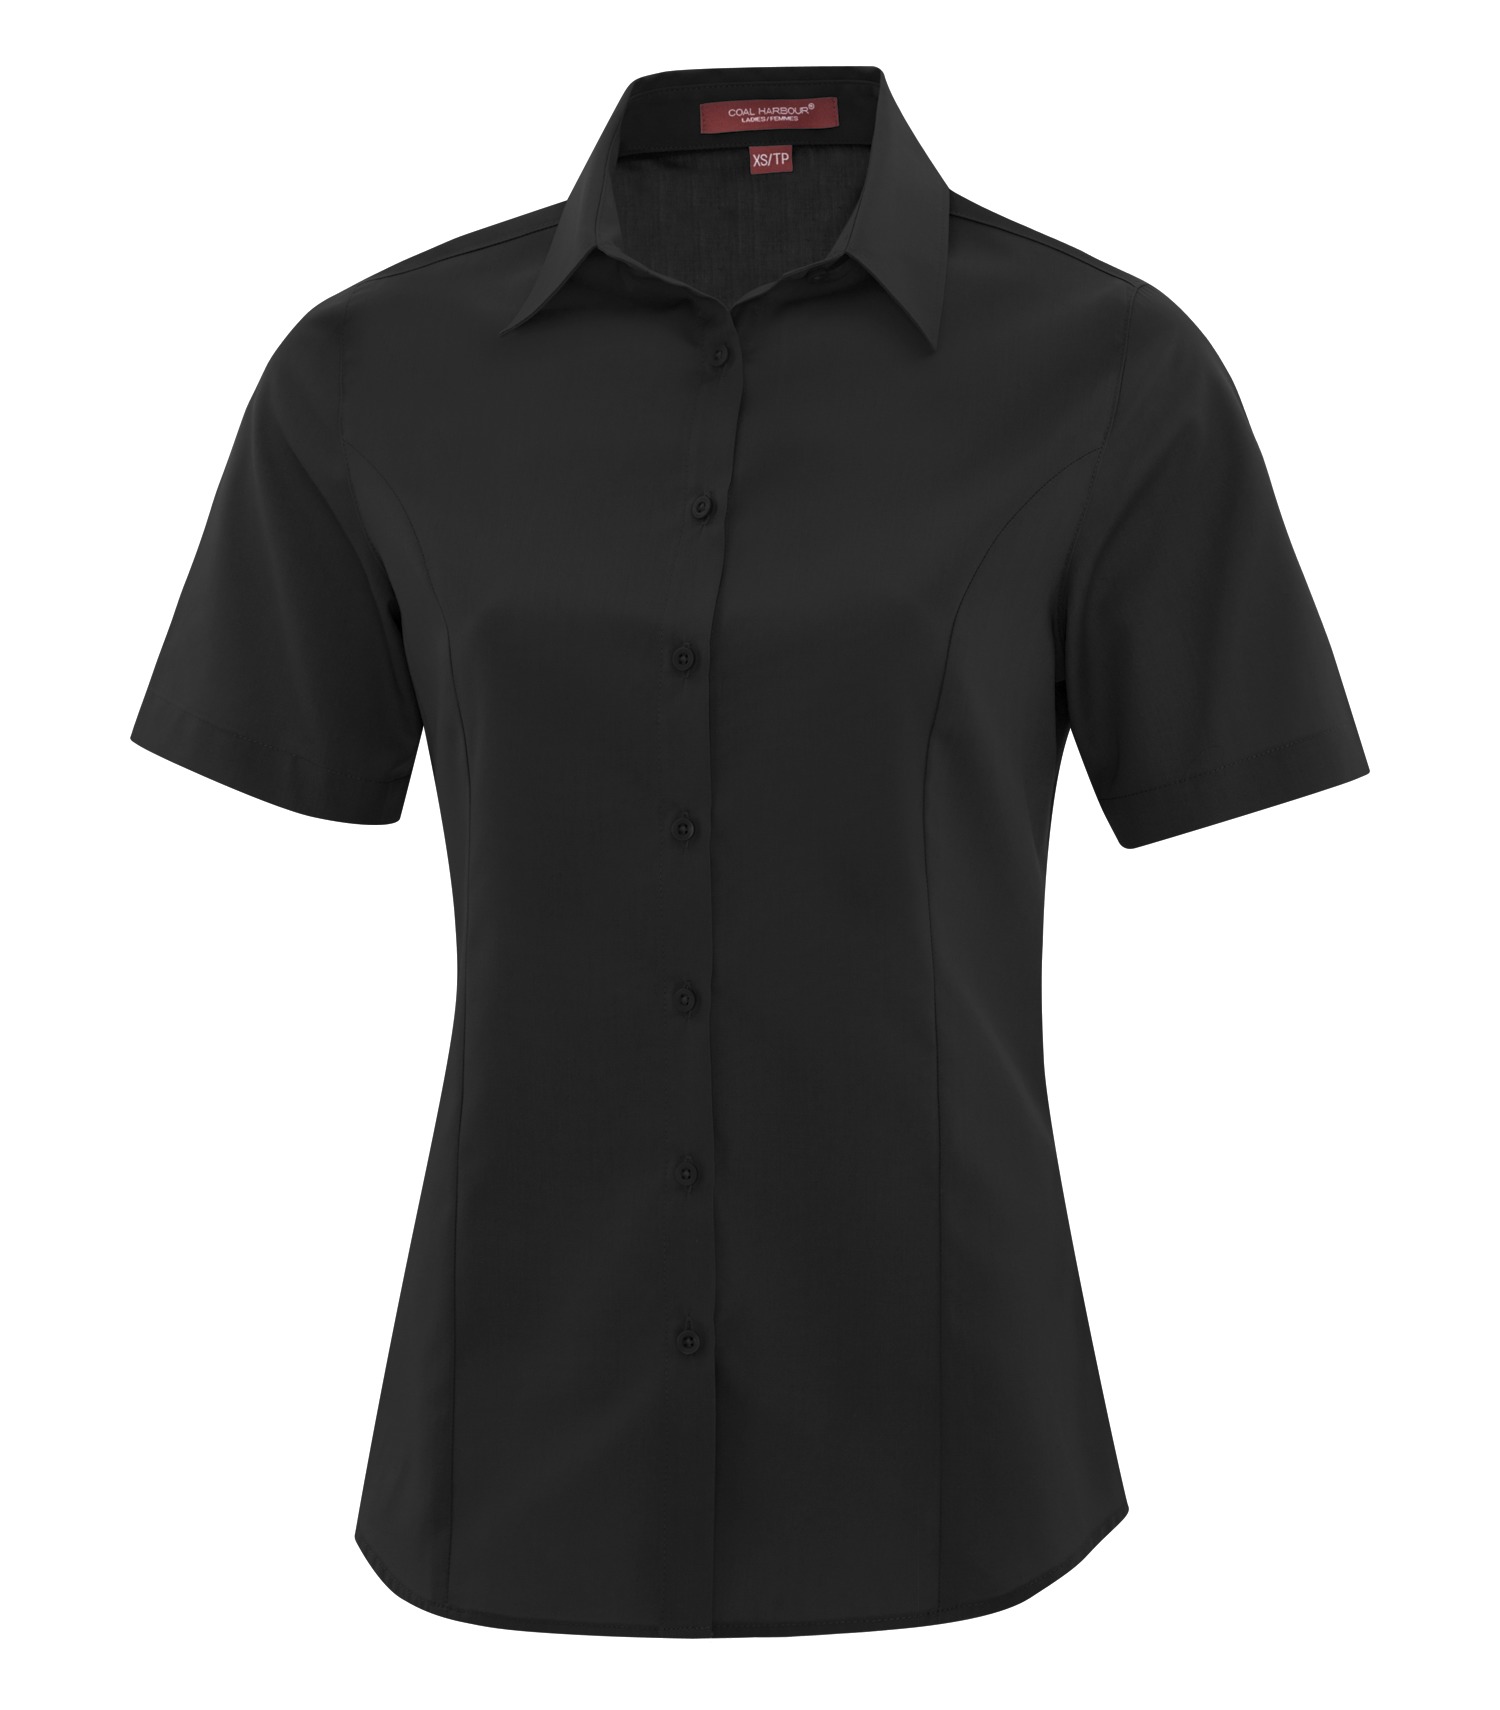 COAL HARBOUR® EVERYDAY SHORT SLEEVE WOVEN LADIES' SHIRT. L6021